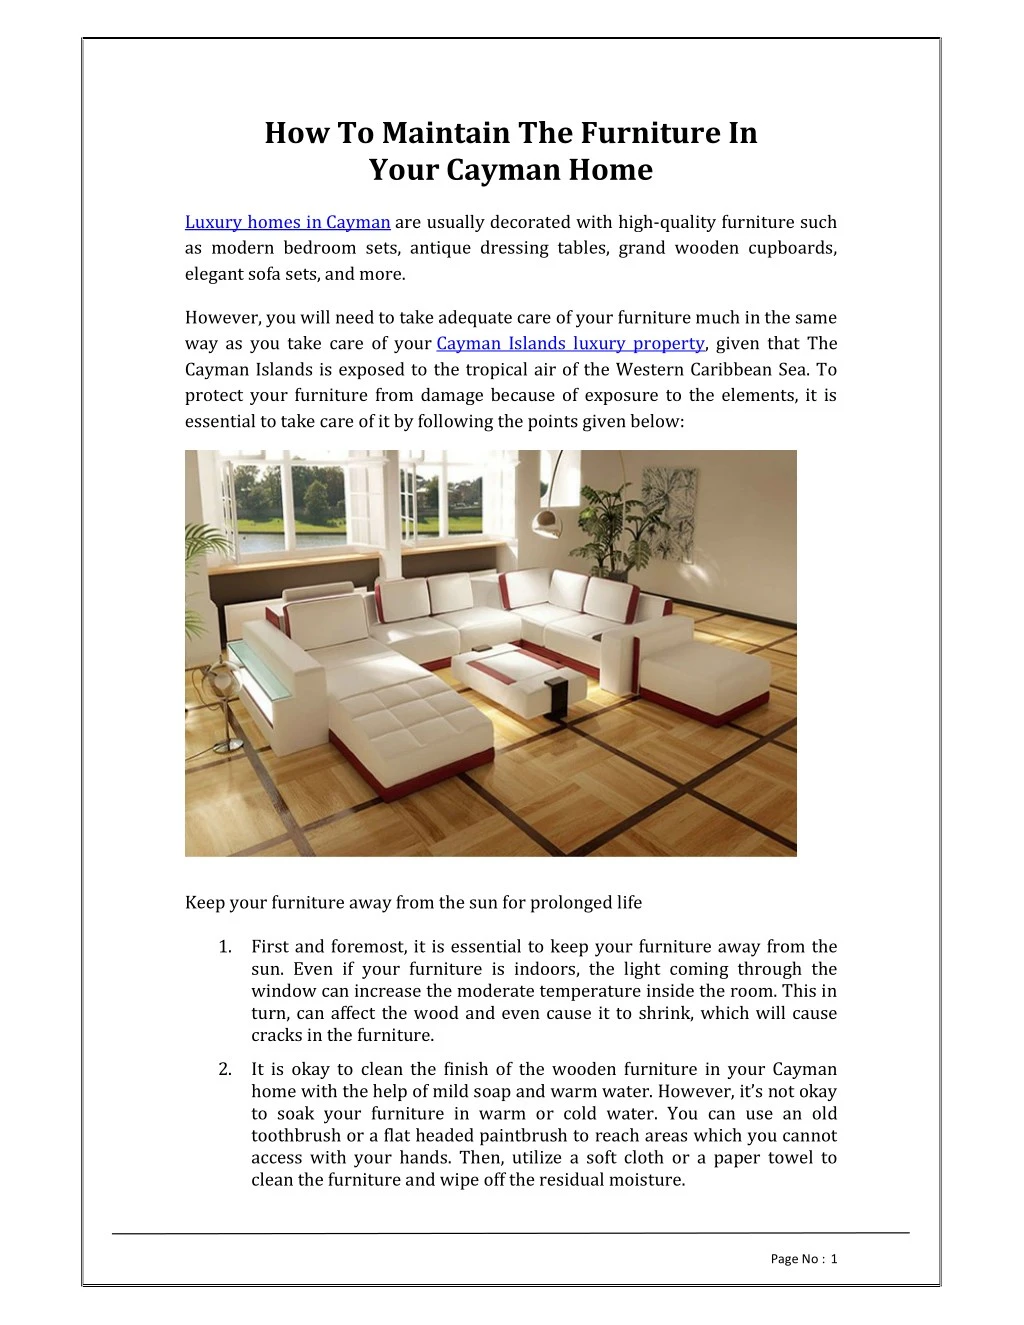 how to maintain the furniture in your cayman home